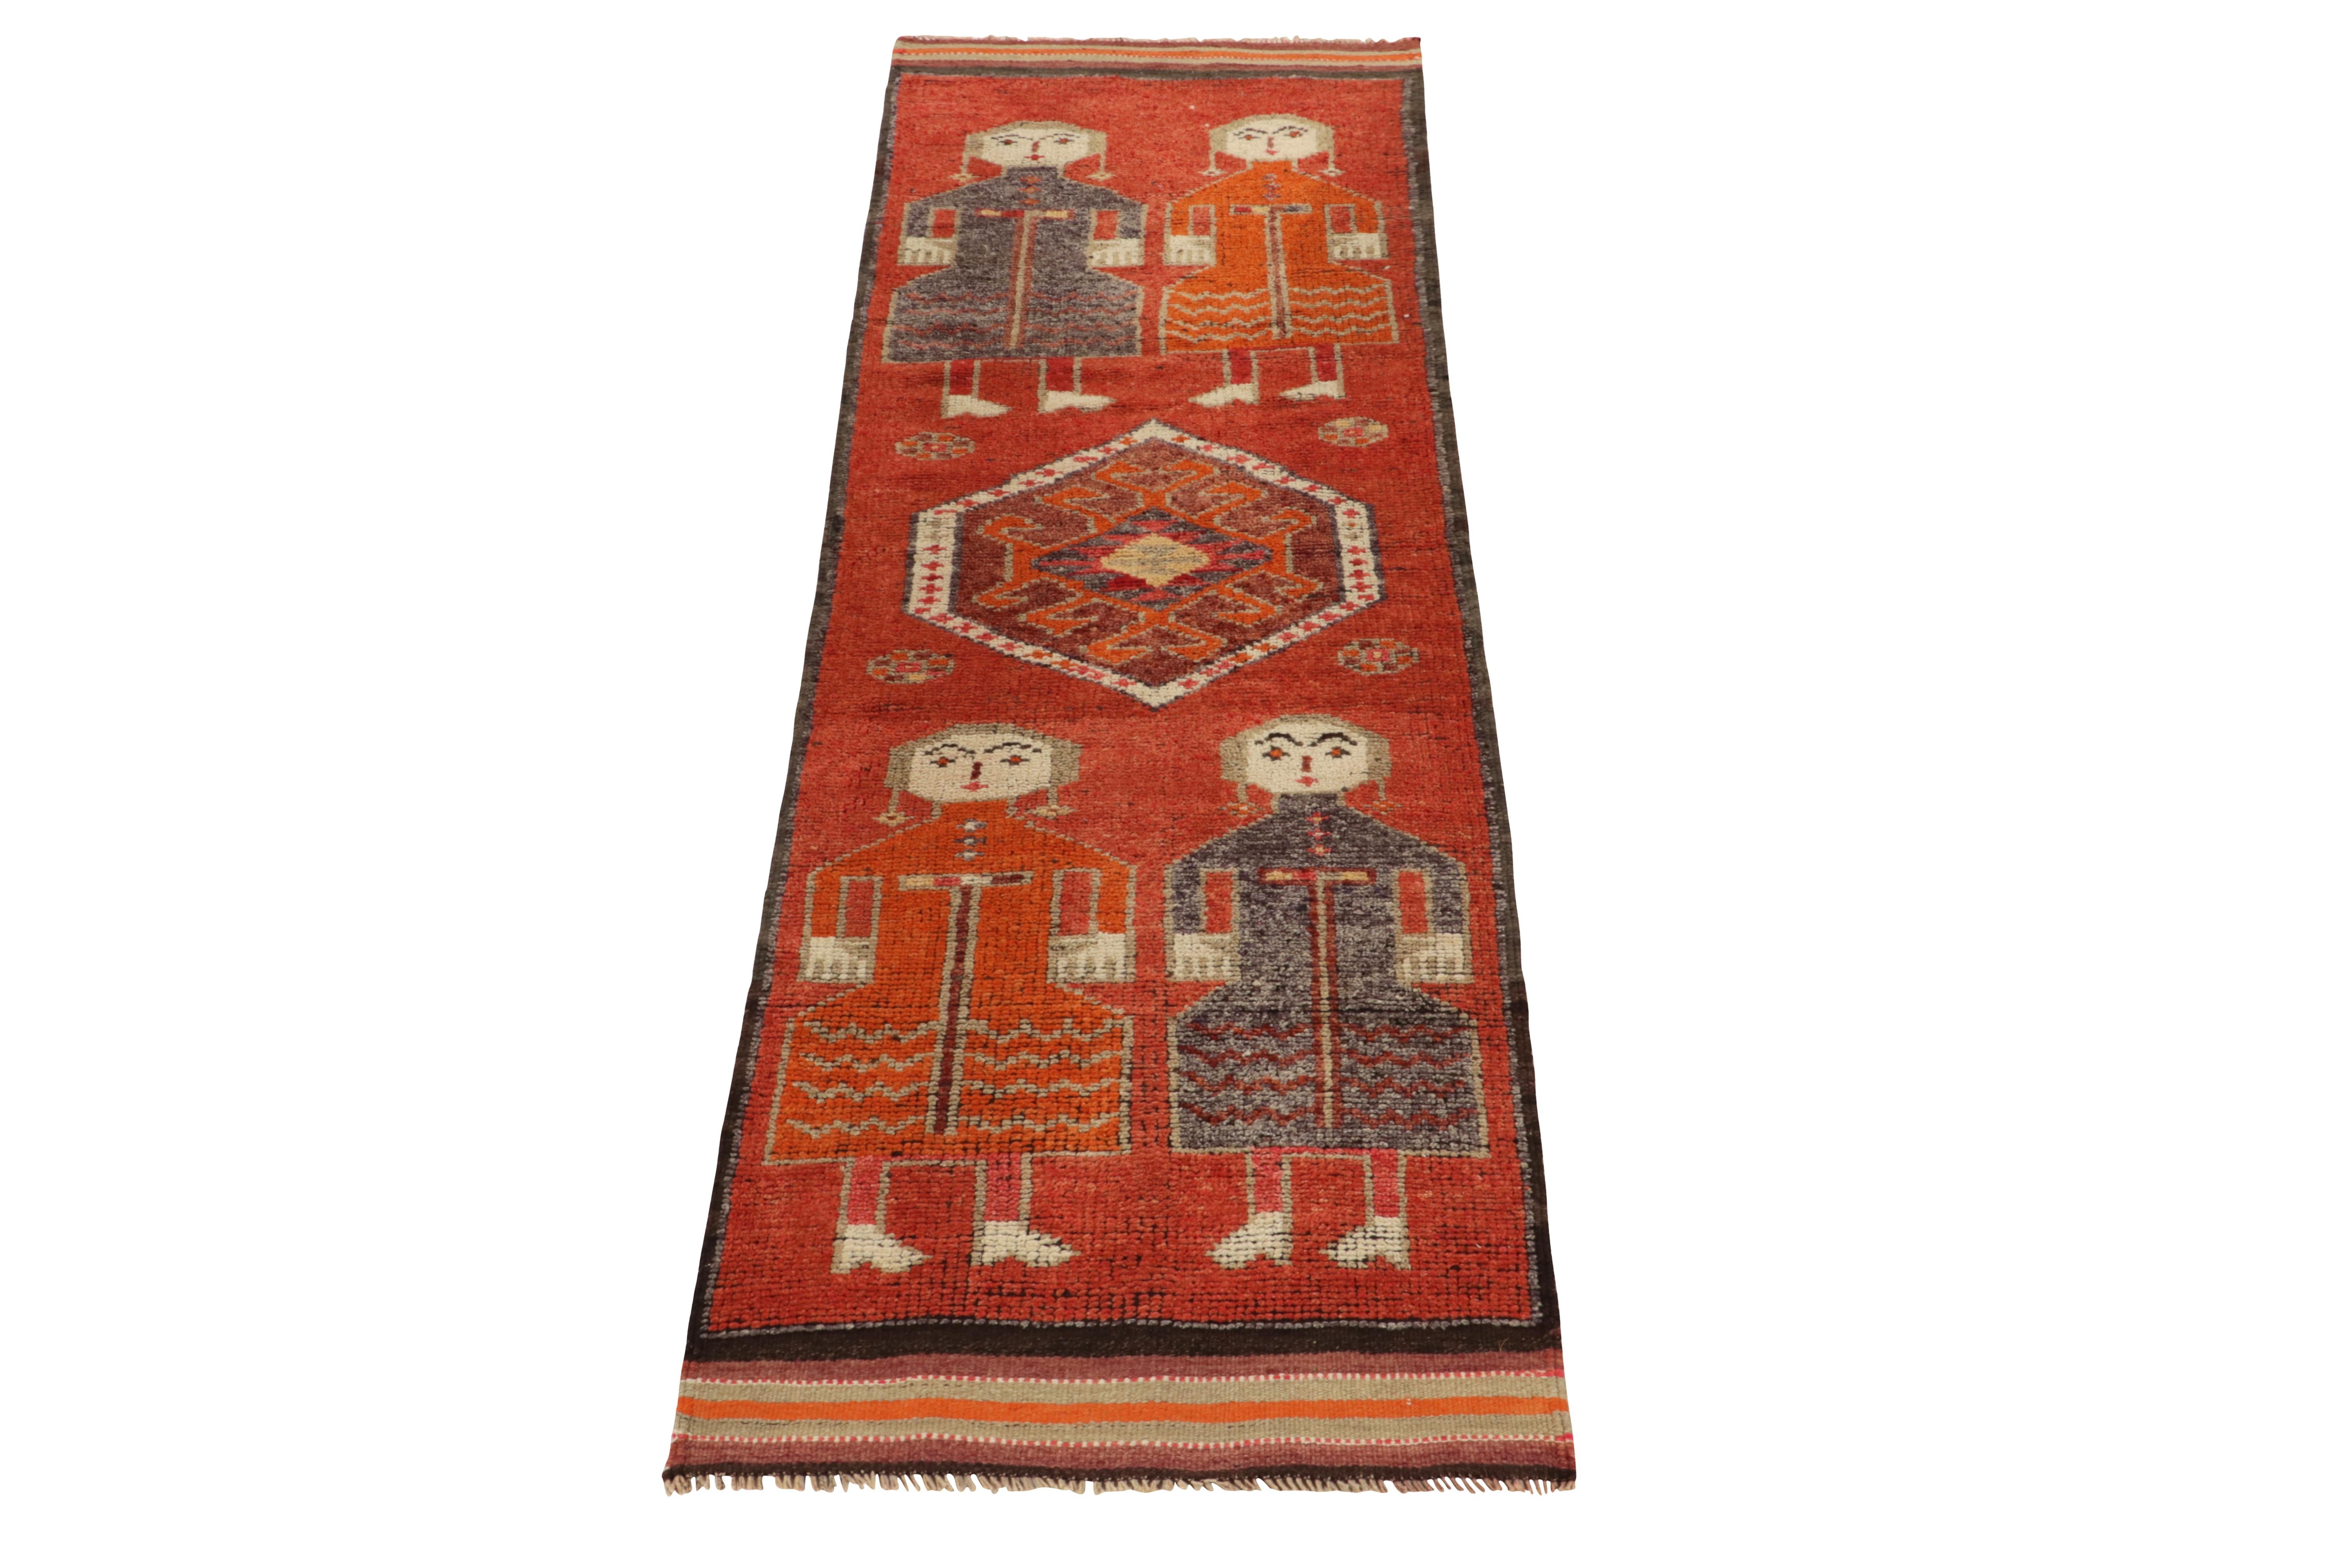 Hand-knotted in wool, a 3x10 runner from Rug & Kilim’s latest curation of rare tribal pieces. Originating from Turkey circa 1950-1960, an arresting piece of culture both decorative and collectible. 

The rug enjoys human pictorials around a